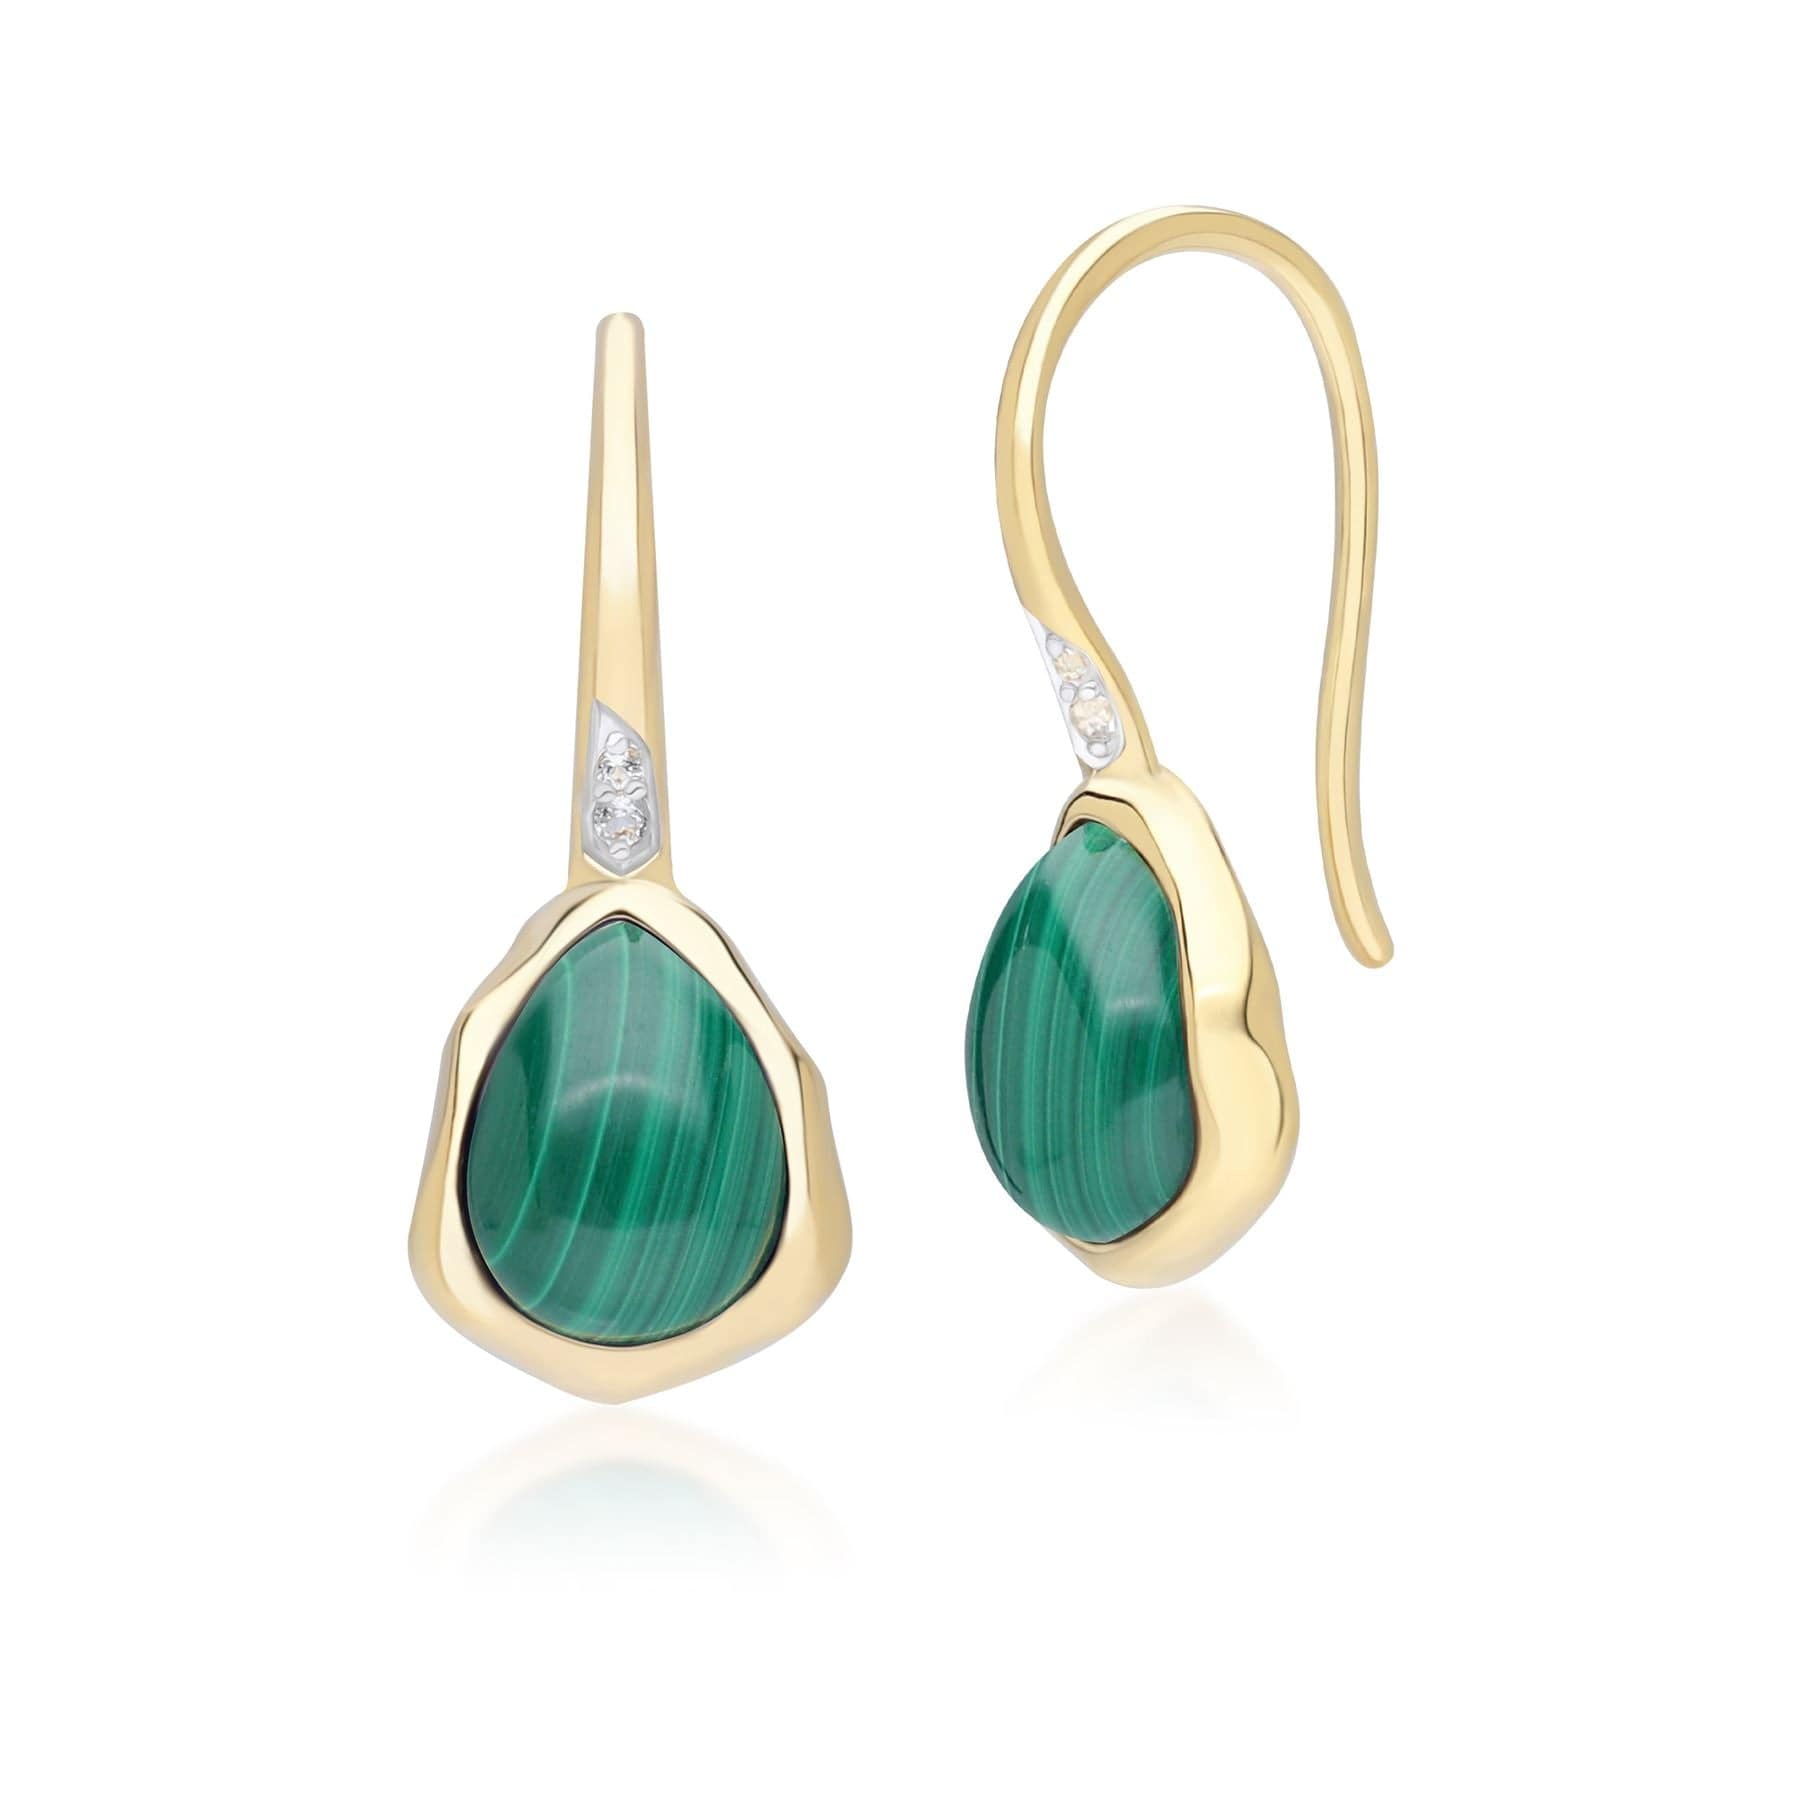 253E418701925 Irregular Malachite & Topaz  Drop Earrings In 18ct Gold Plated SterlIng Silver Front